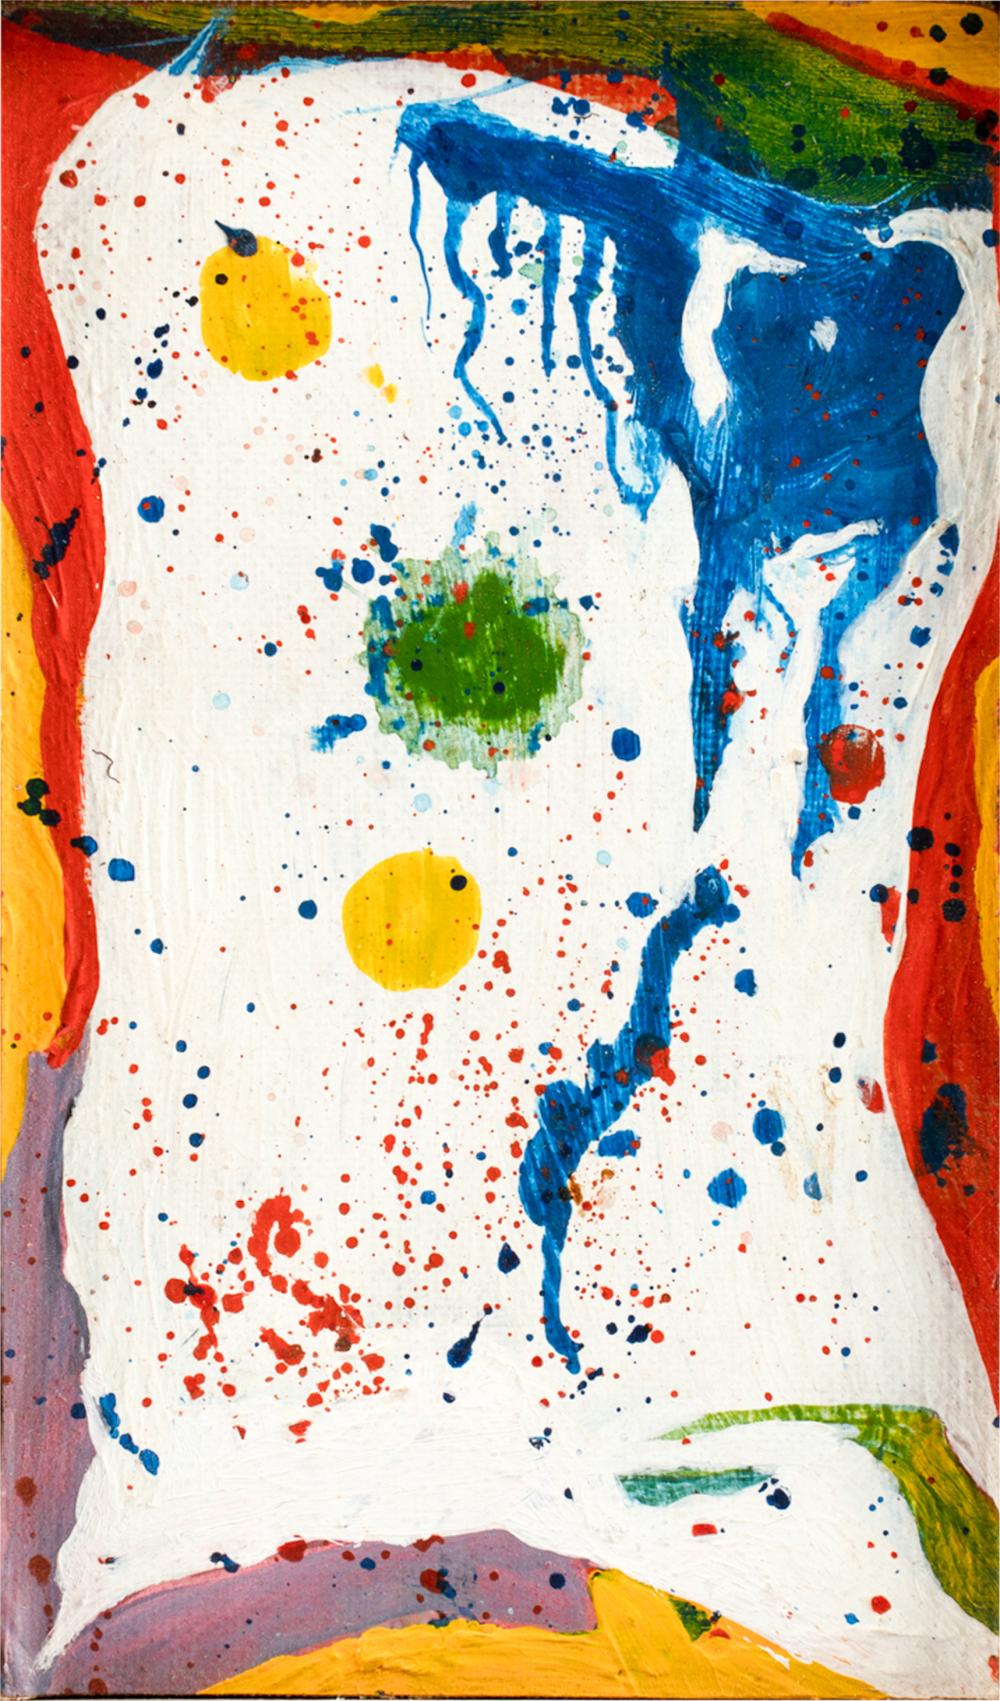 ATTRIBUTED TO SAM FRANCIS 1923 32dca3